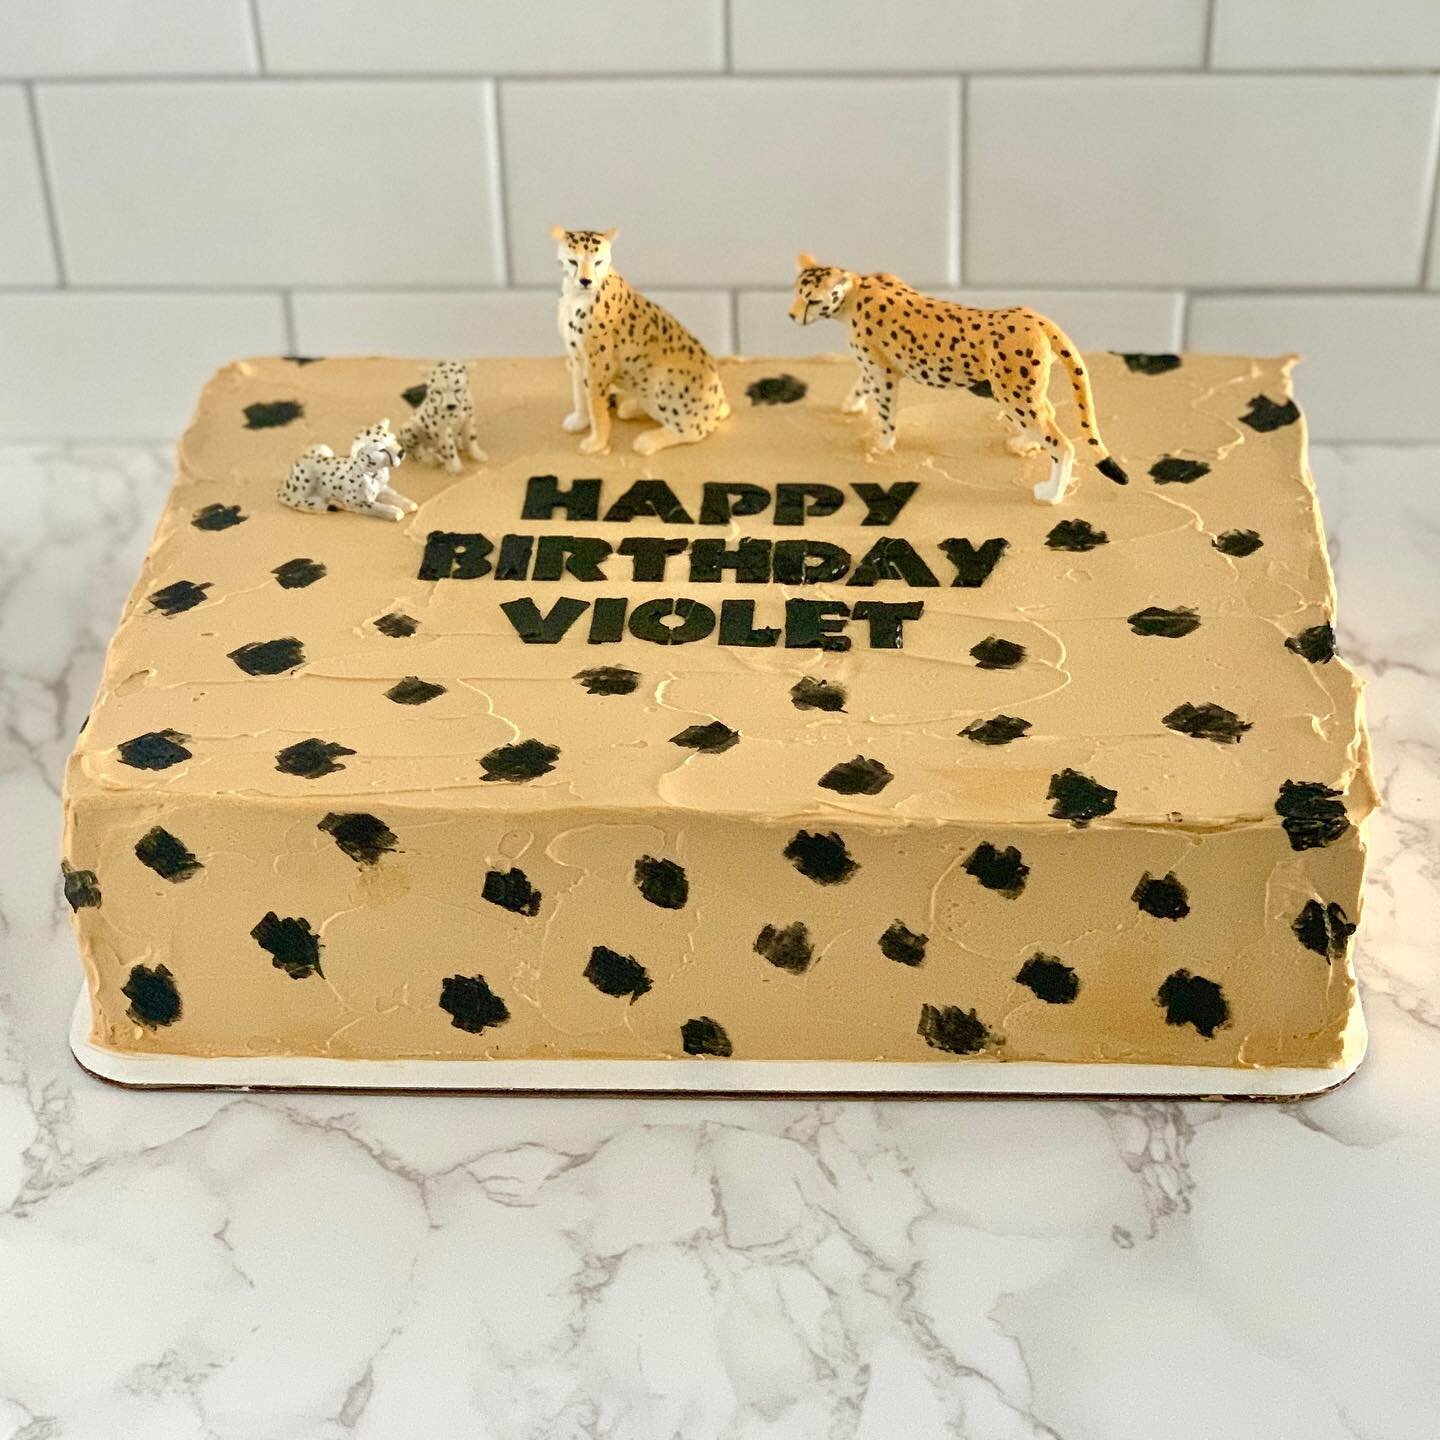 When your birthday falls on National Cheetah Day 🐆

Confetti cake with vanilla buttercream